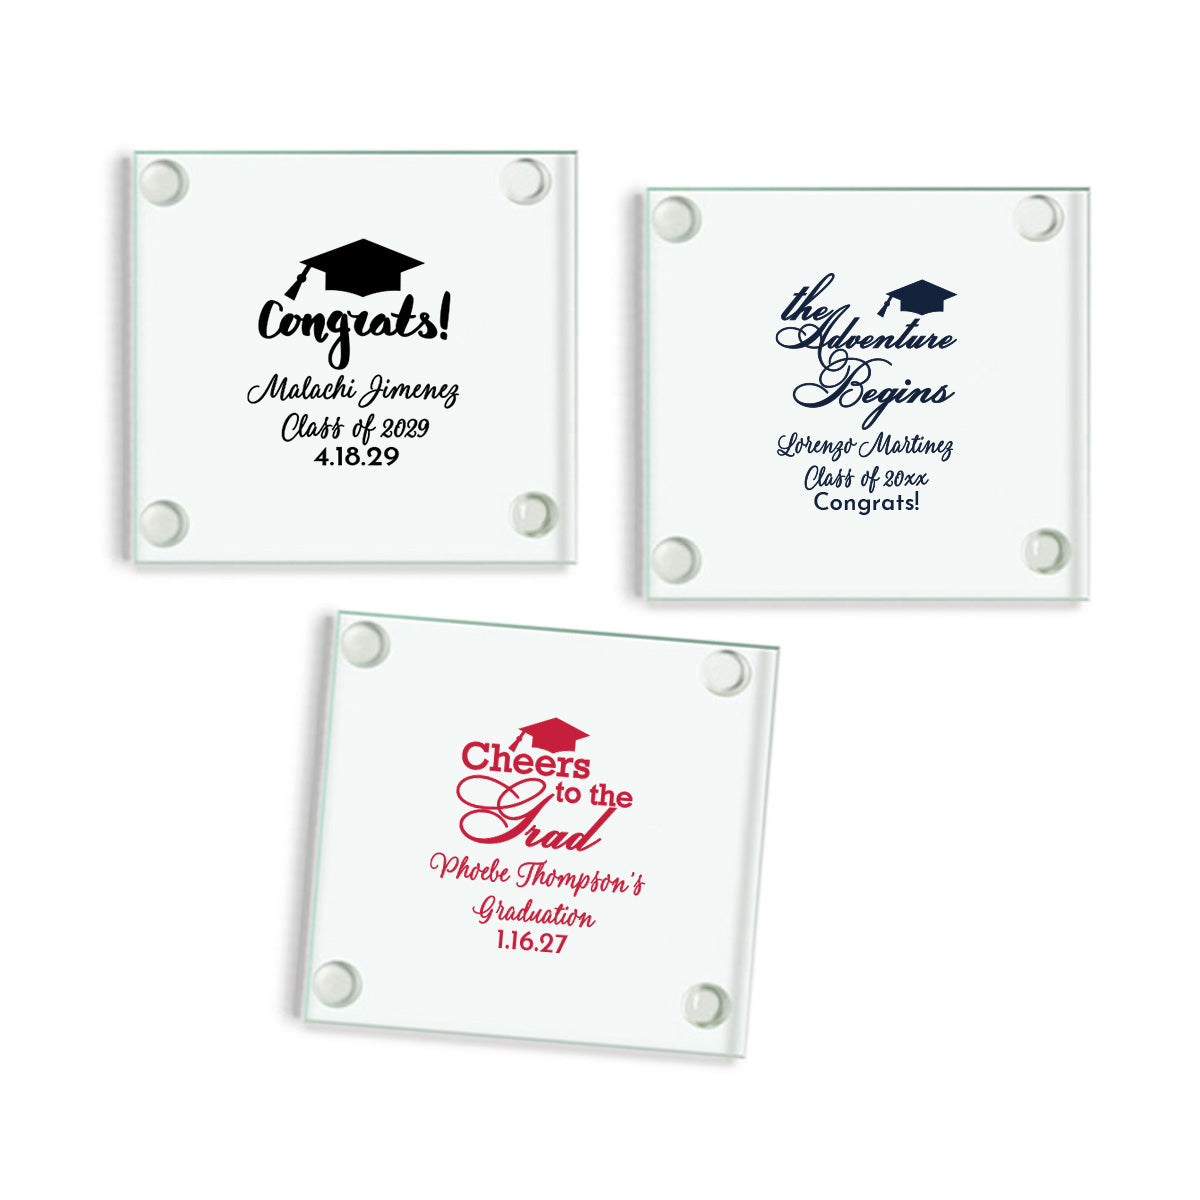 Cheers to the Grad Personalized Glass Coaster (Set of 24)